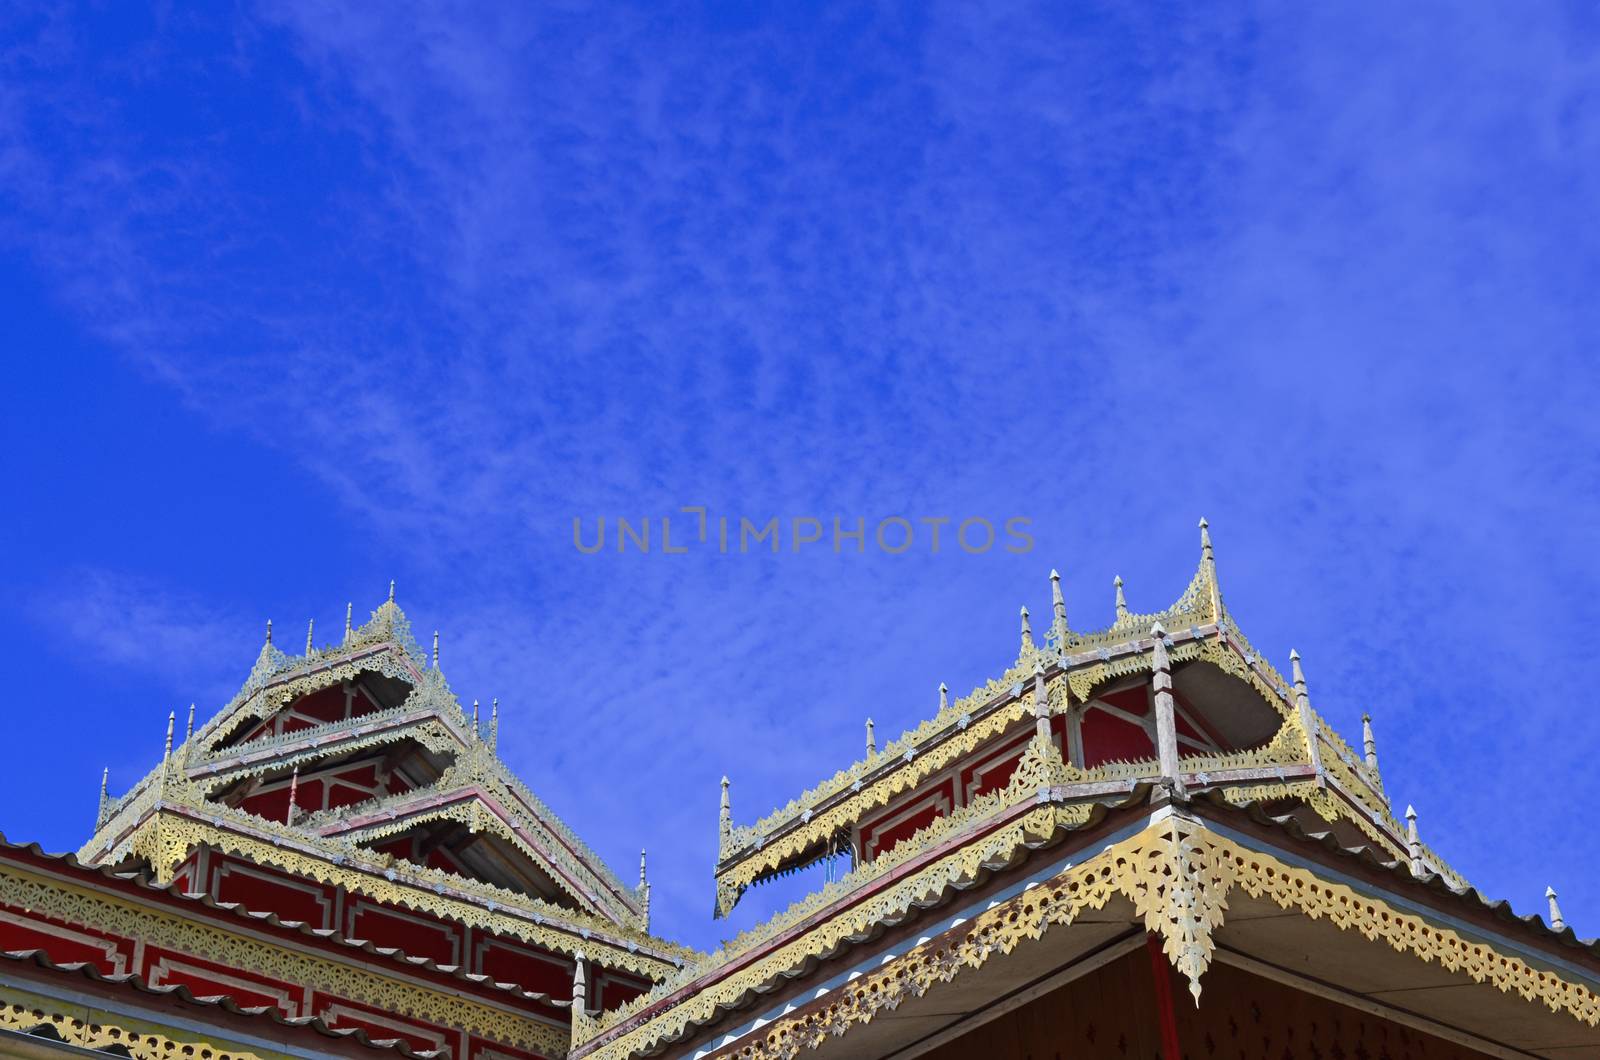 Architecture of Roof of Tai Yai's Buddhist Temple.